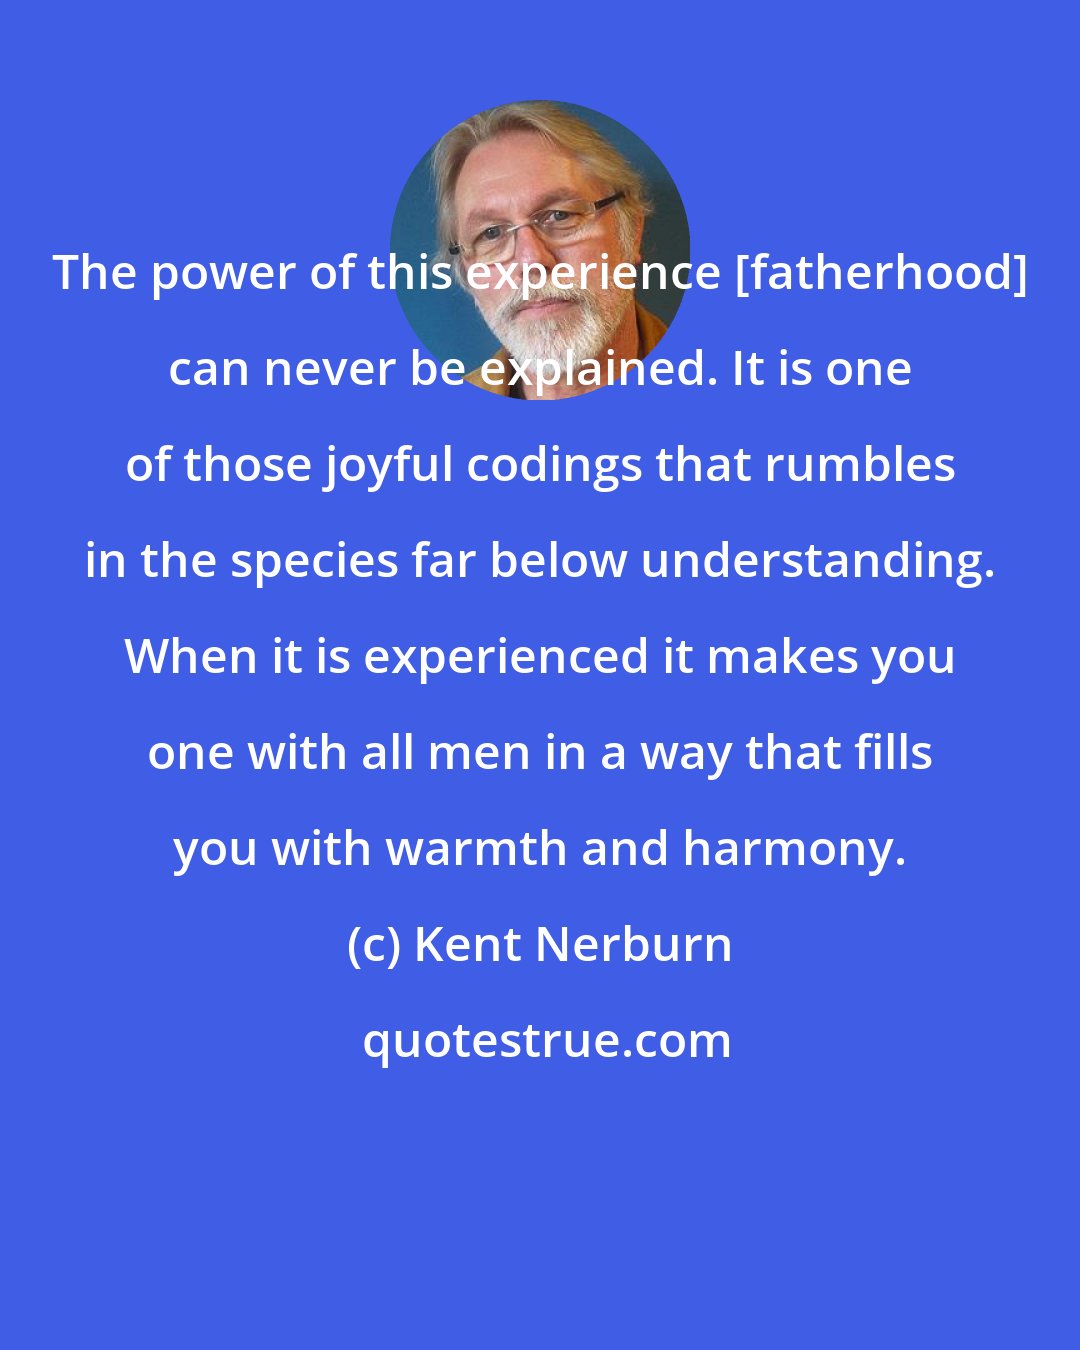 Kent Nerburn: The power of this experience [fatherhood] can never be explained. It is one of those joyful codings that rumbles in the species far below understanding. When it is experienced it makes you one with all men in a way that fills you with warmth and harmony.